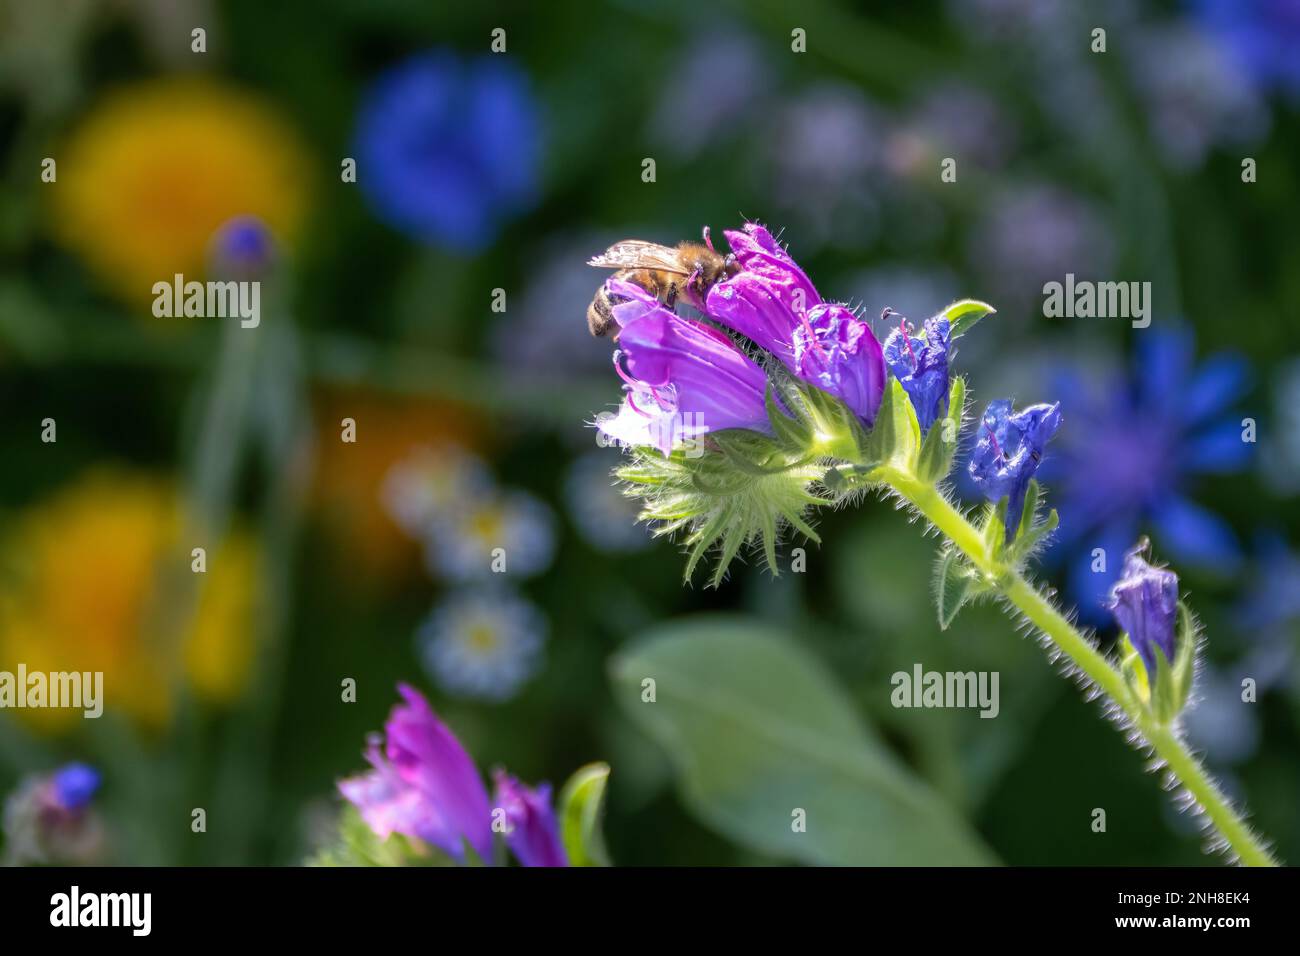 bumble bee collecting nectar from pink flowers of viper's bugloss with colourful wildflowers blurred in the background Stock Photo